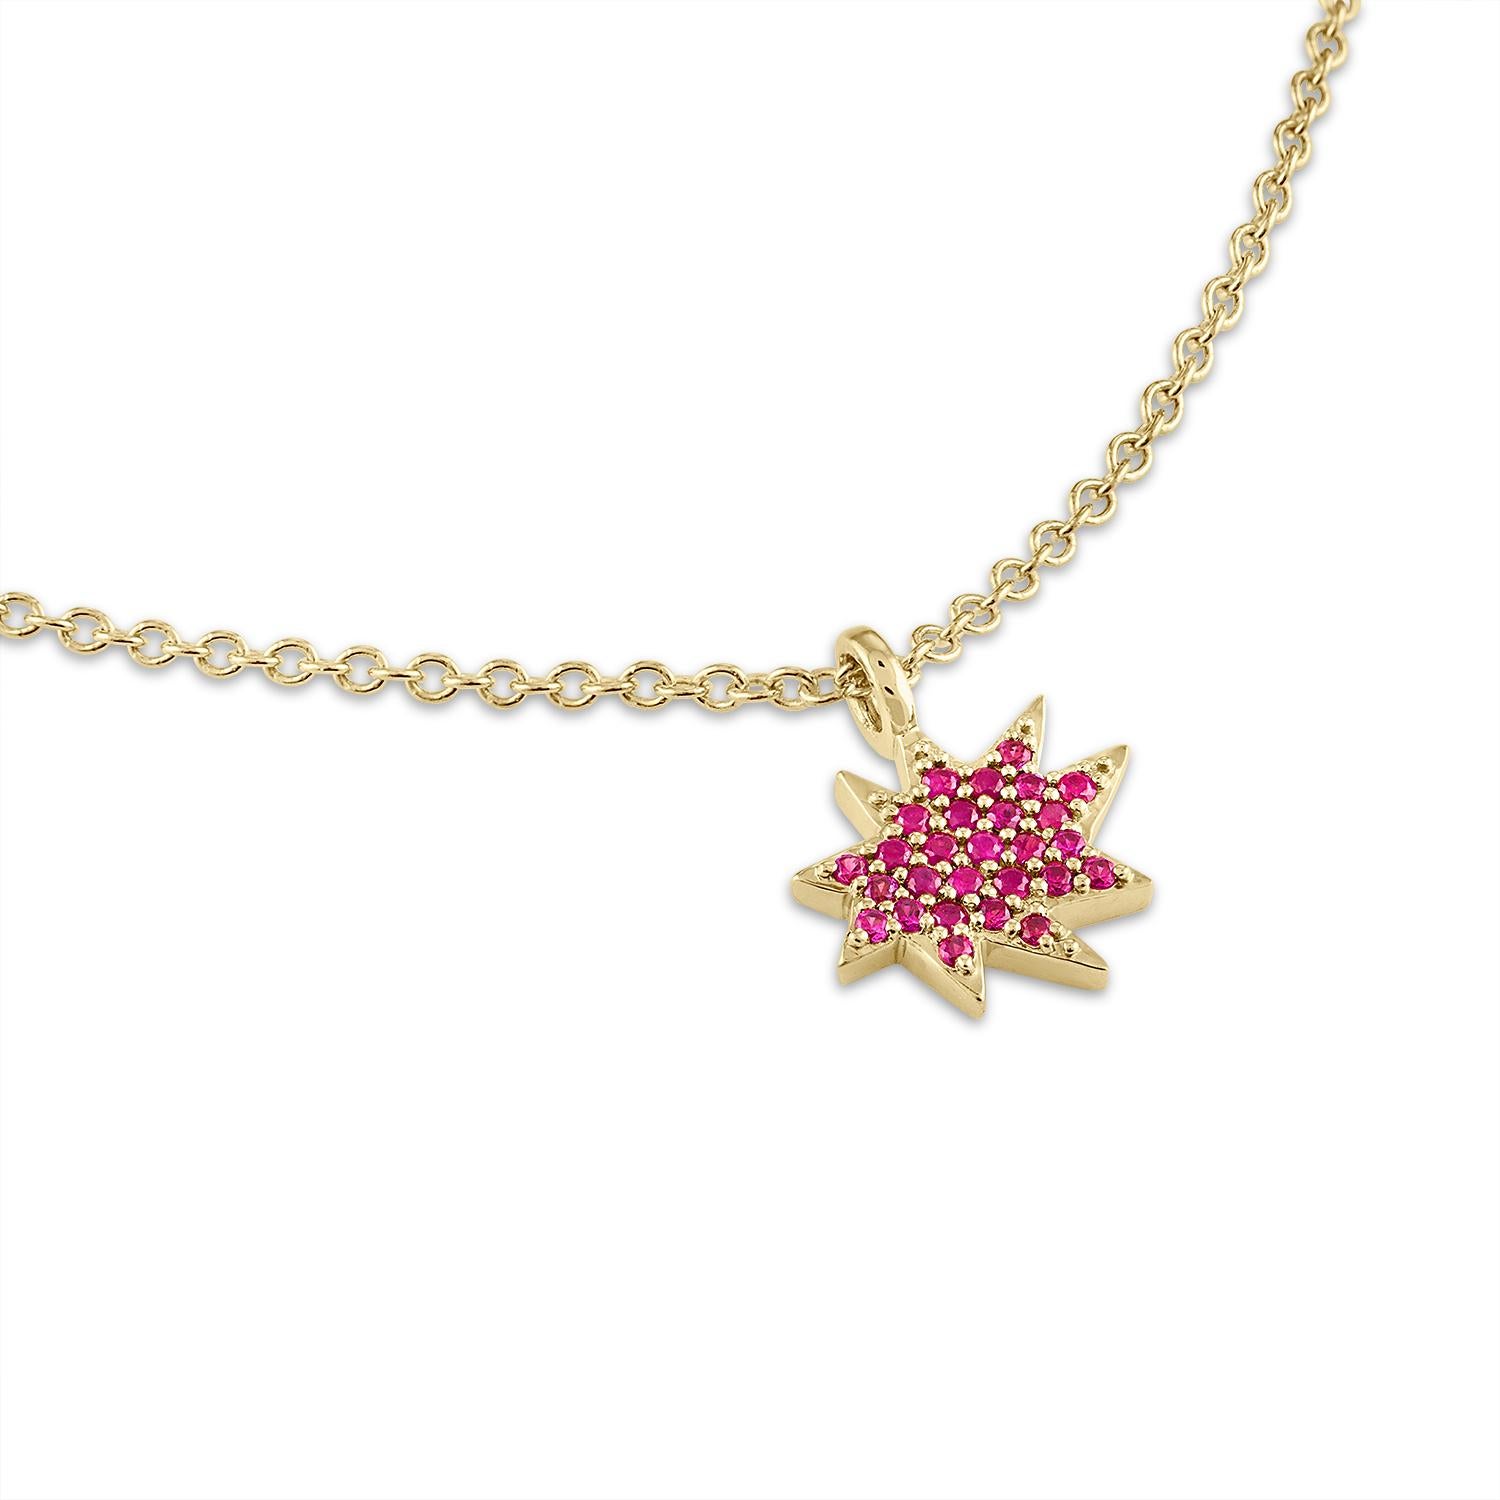 Elegant and adorable! Our Mini Stella Necklace is the perfect piece to layer or wear alone. Our iconic 14k gold organic star in a new delicate size hangs on a 14k gold chain and sparkles with a gorgeous little carpet of rubies. 

KAPOW! The Stella